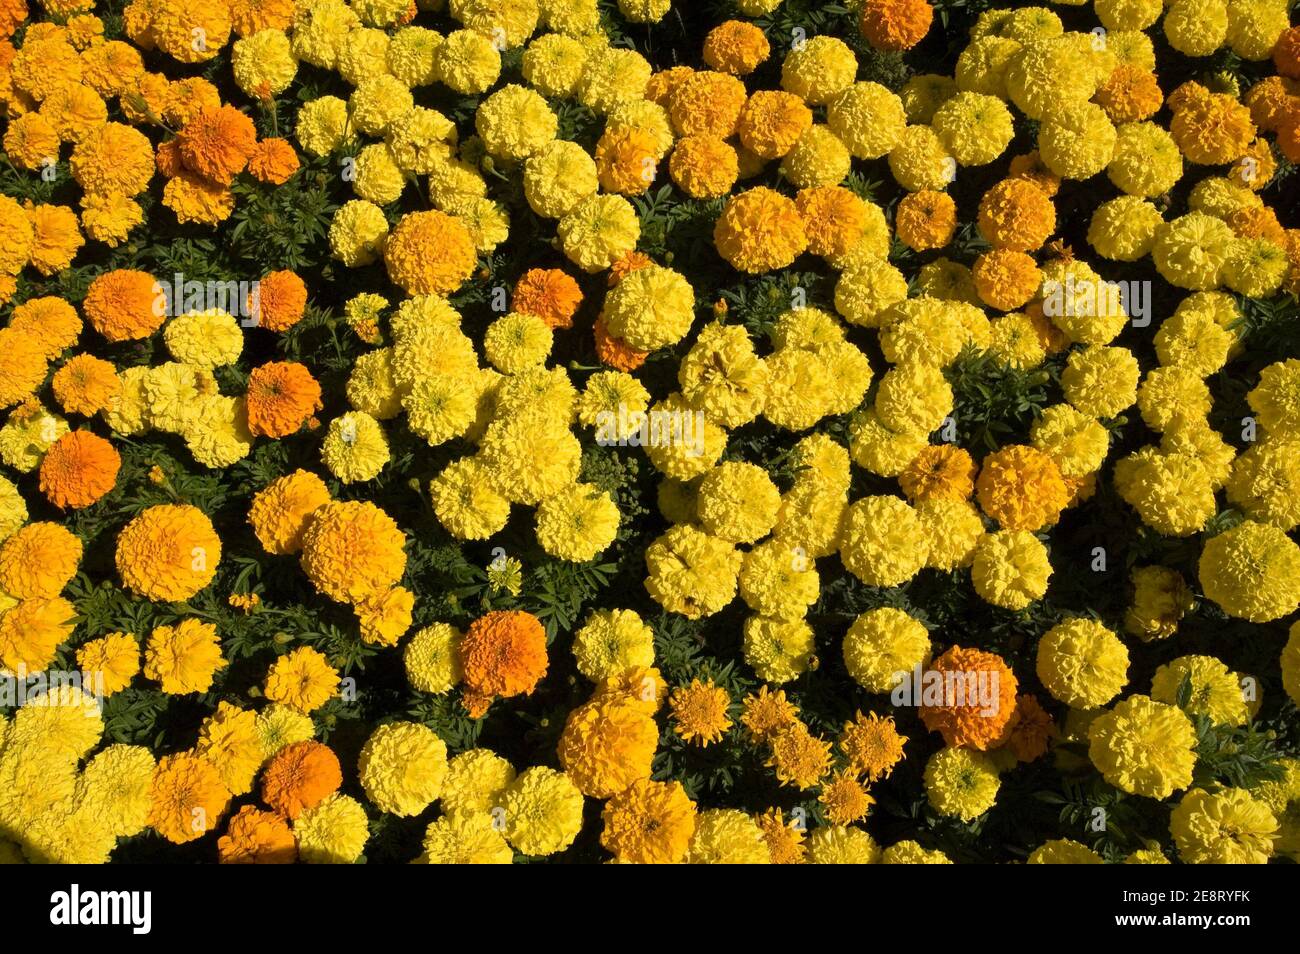 Looking down on a flowerbed of yellow marigolds, latin name Calendula officinalis. Could be used as a background. Stock Photo